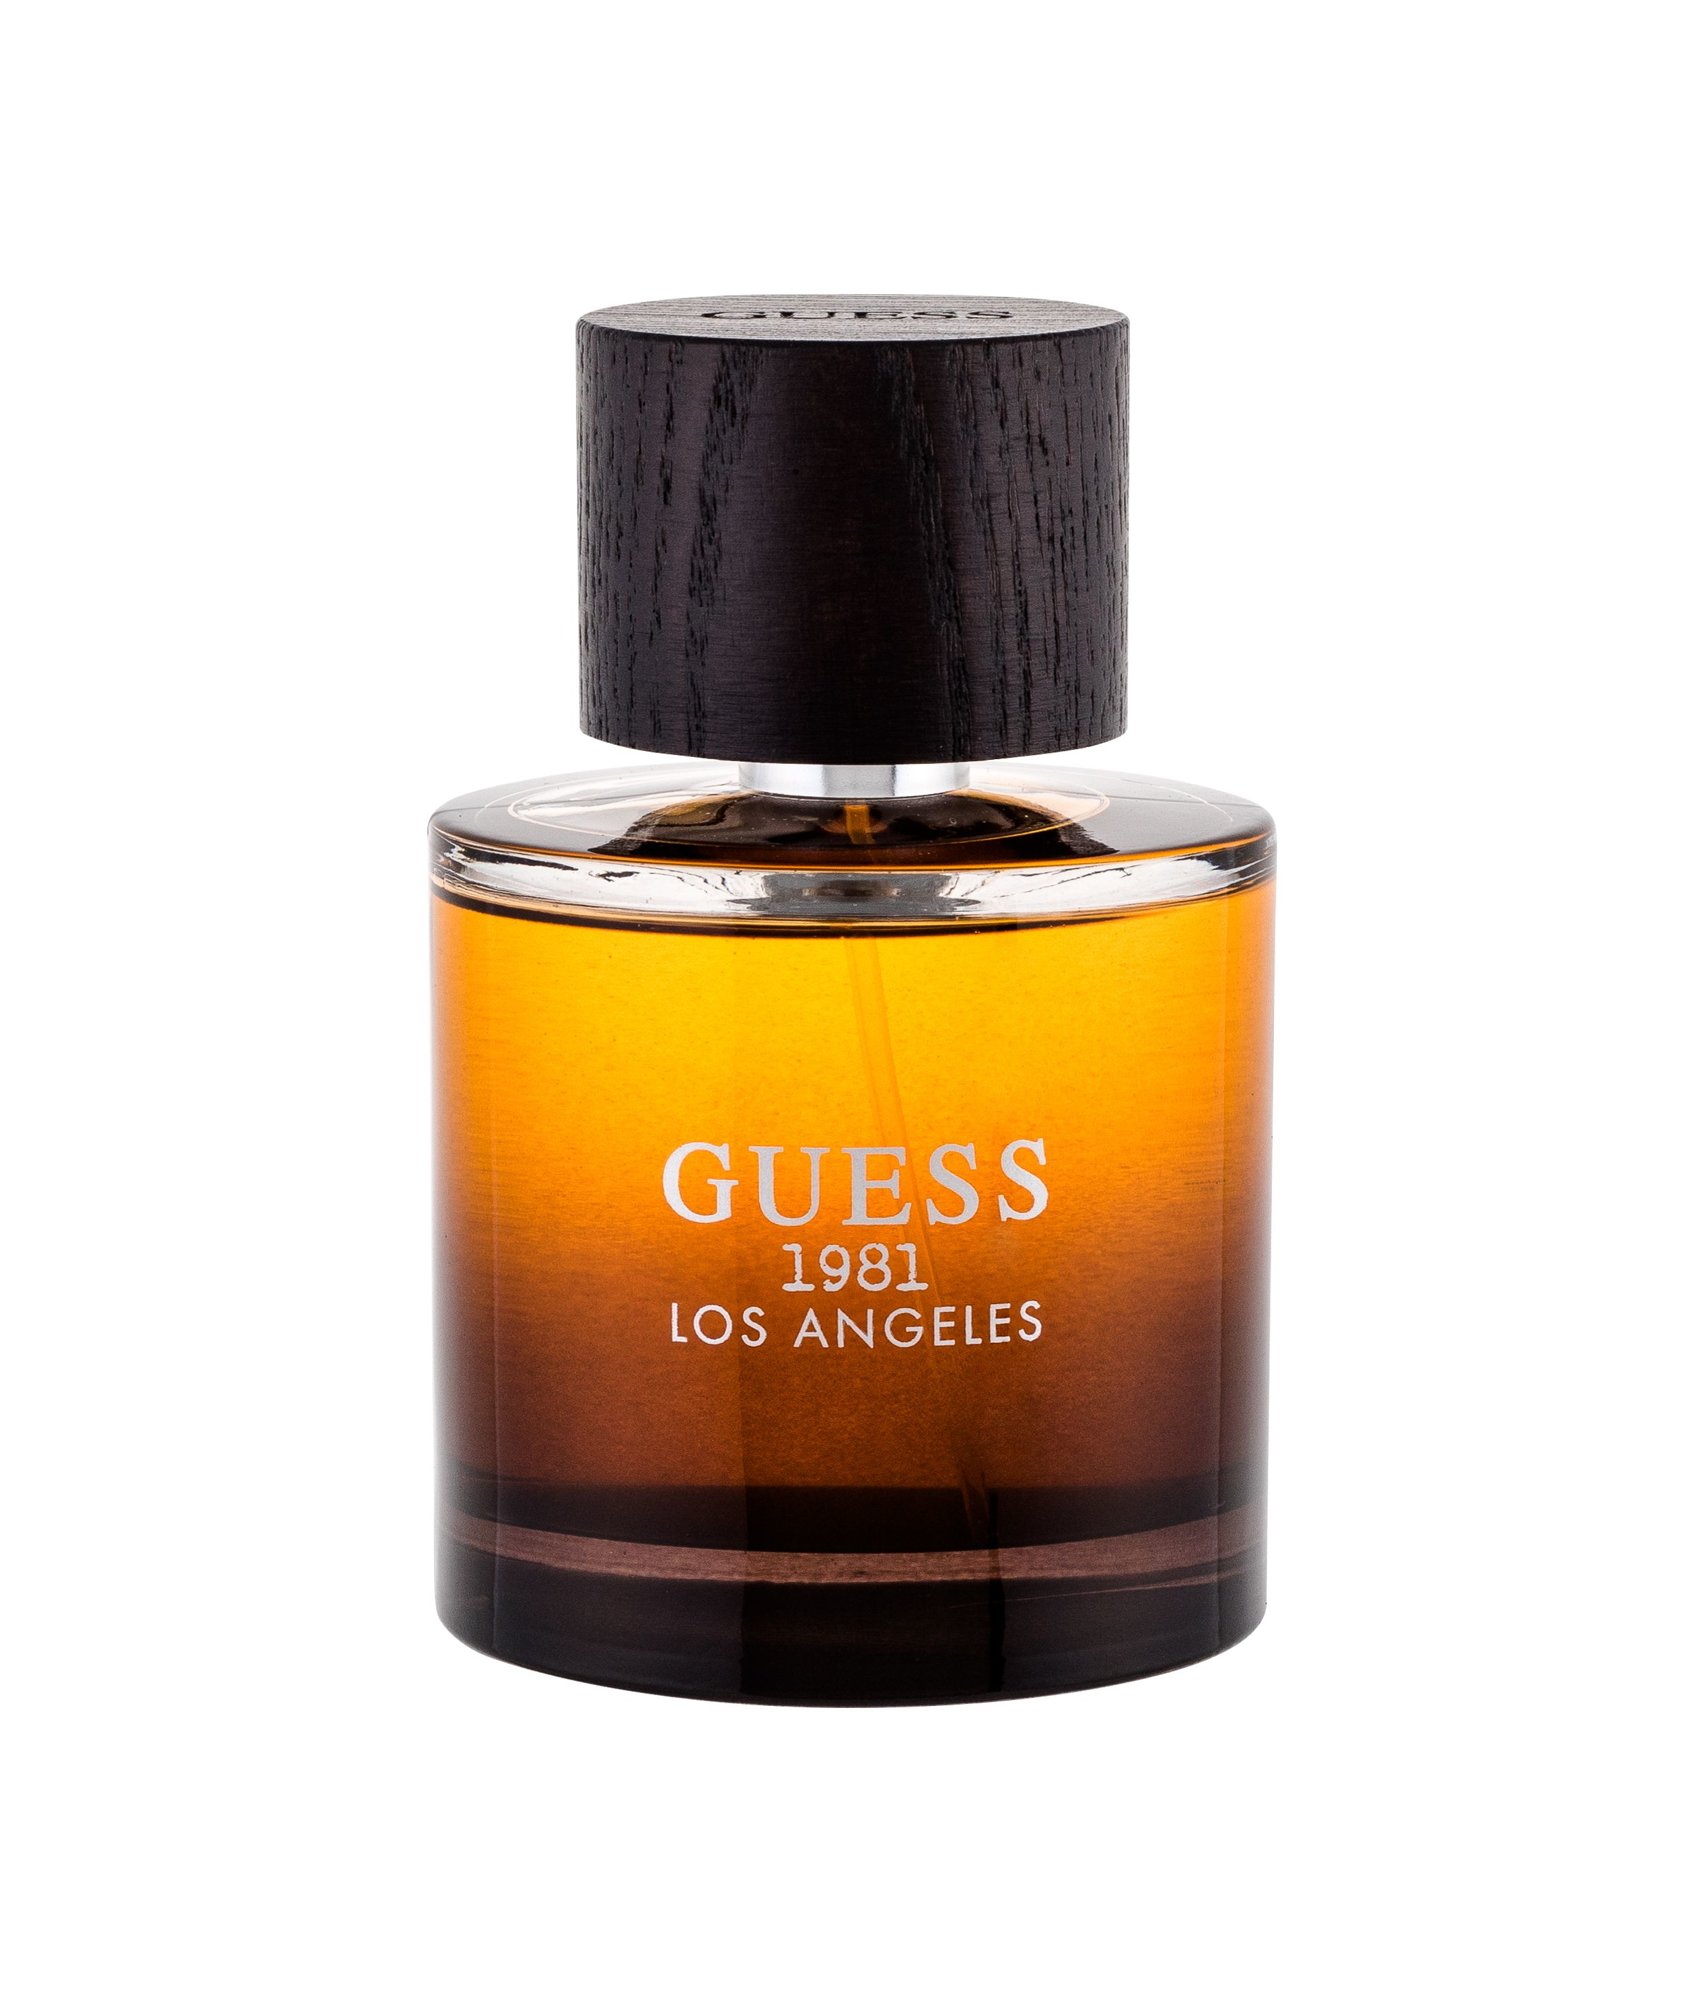 GUESS Guess 1981 Los Angeles, Toaletná voda 100ml